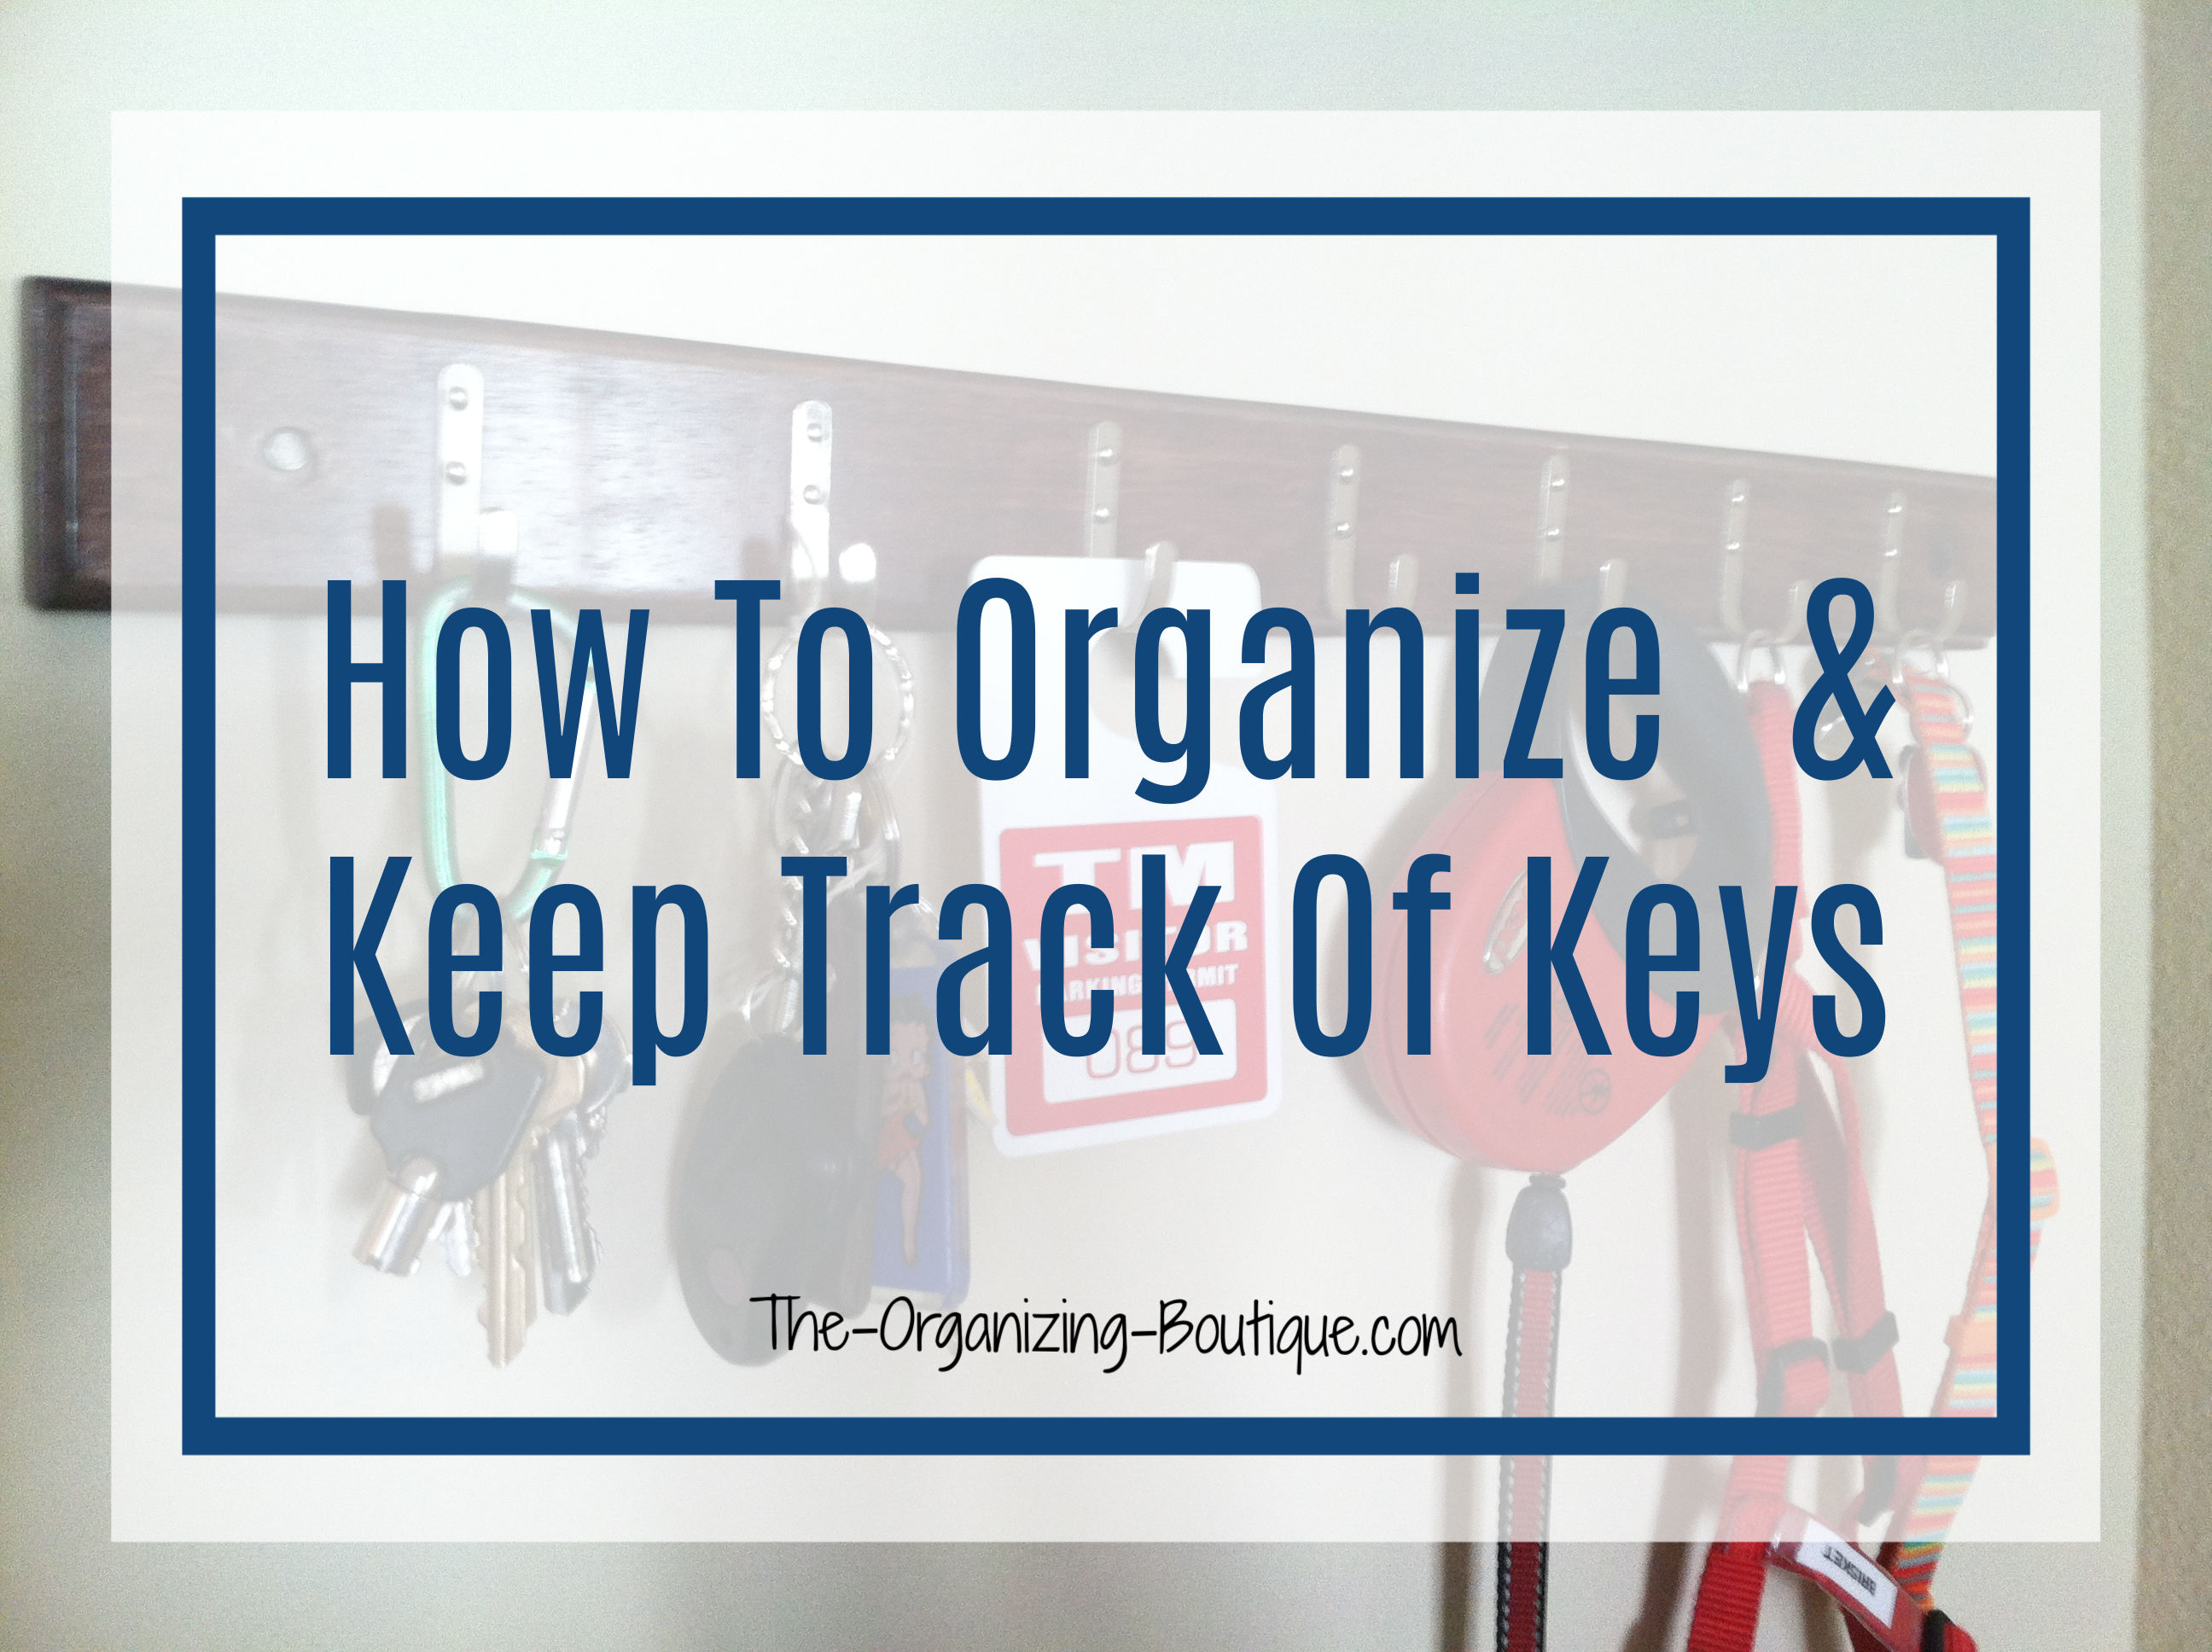 Lost your keys? Need a key ring finder or a key organizer? Here are entryway storage tips for organizing your keys!